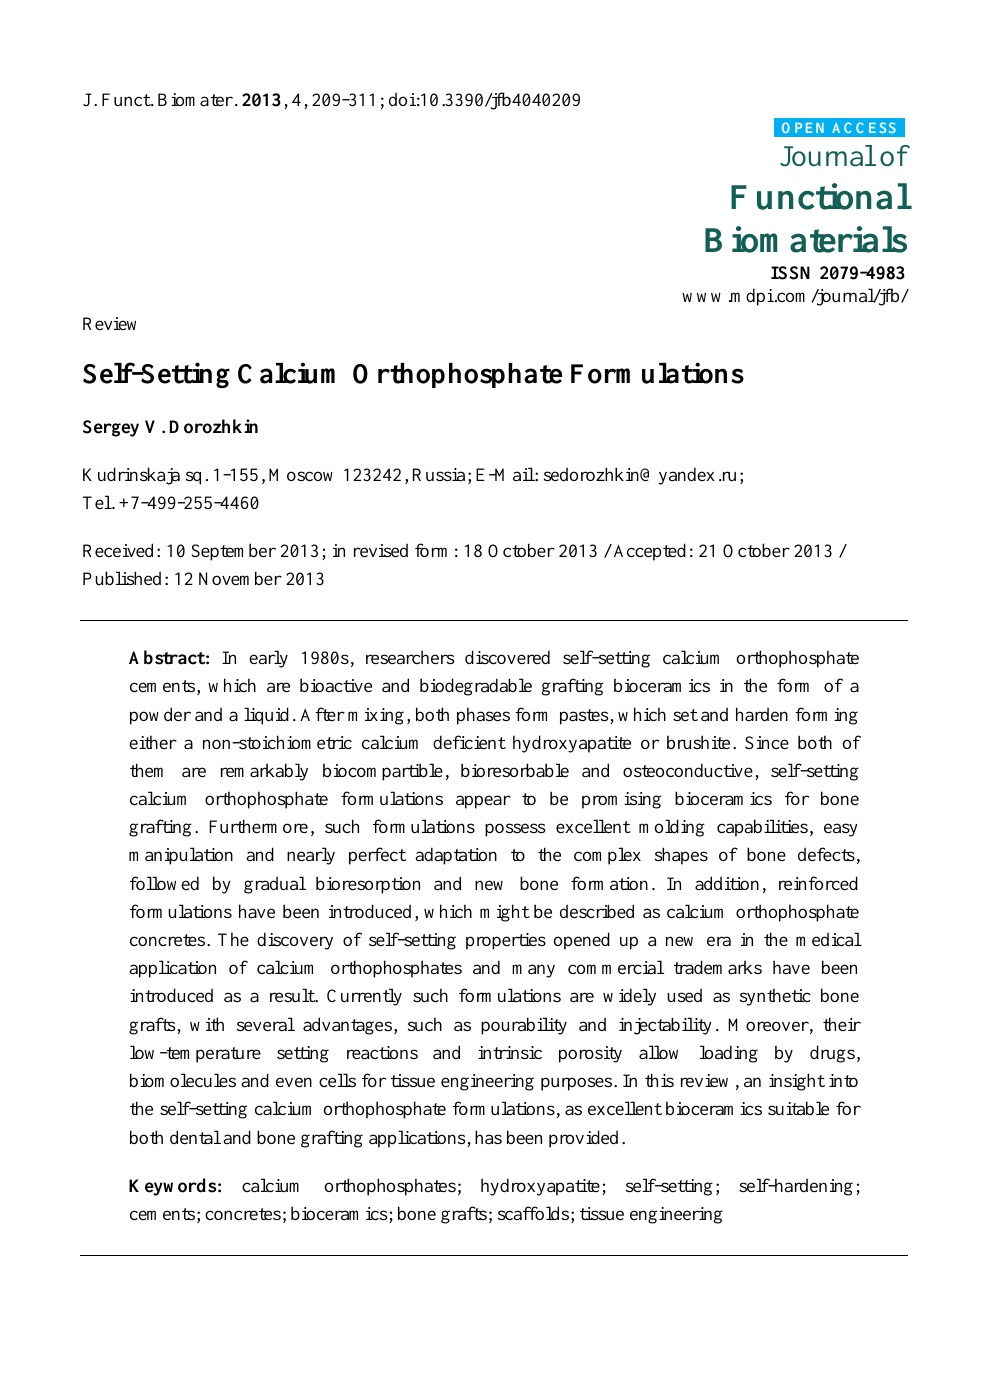 Self-Setting Calcium Orthophosphate Formulations – topic of research paper  in Medical engineering. Download scholarly article PDF and read for free on  CyberLeninka open science hub.